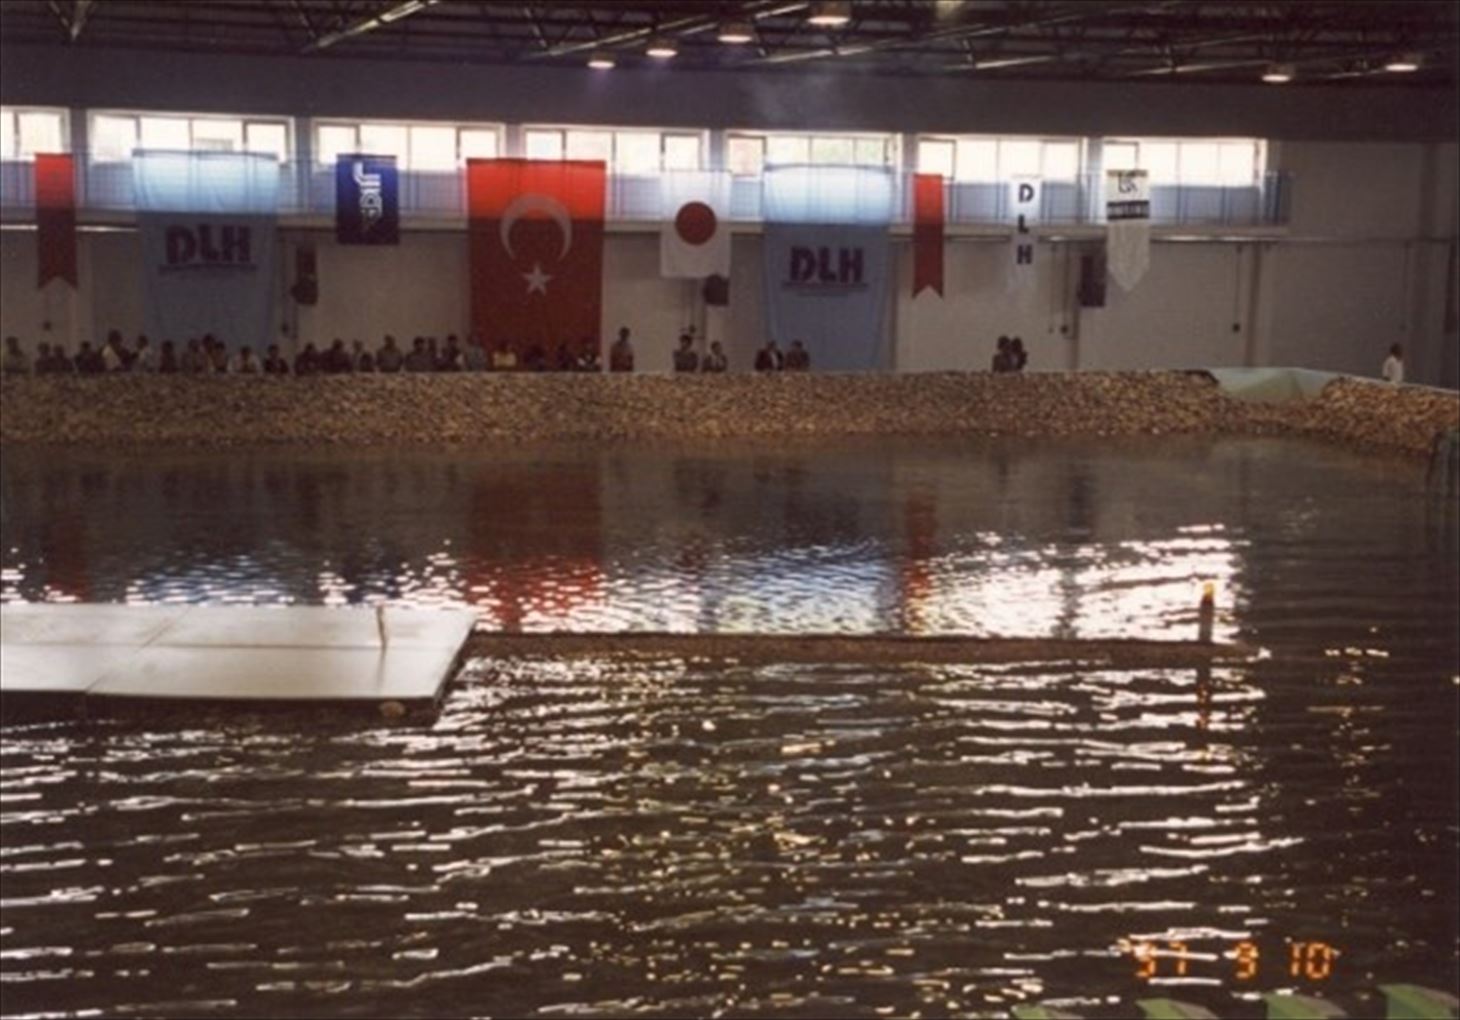 Photo 7: Opening ceremony of Port Hydraulic Center in Turkey (September 1997)